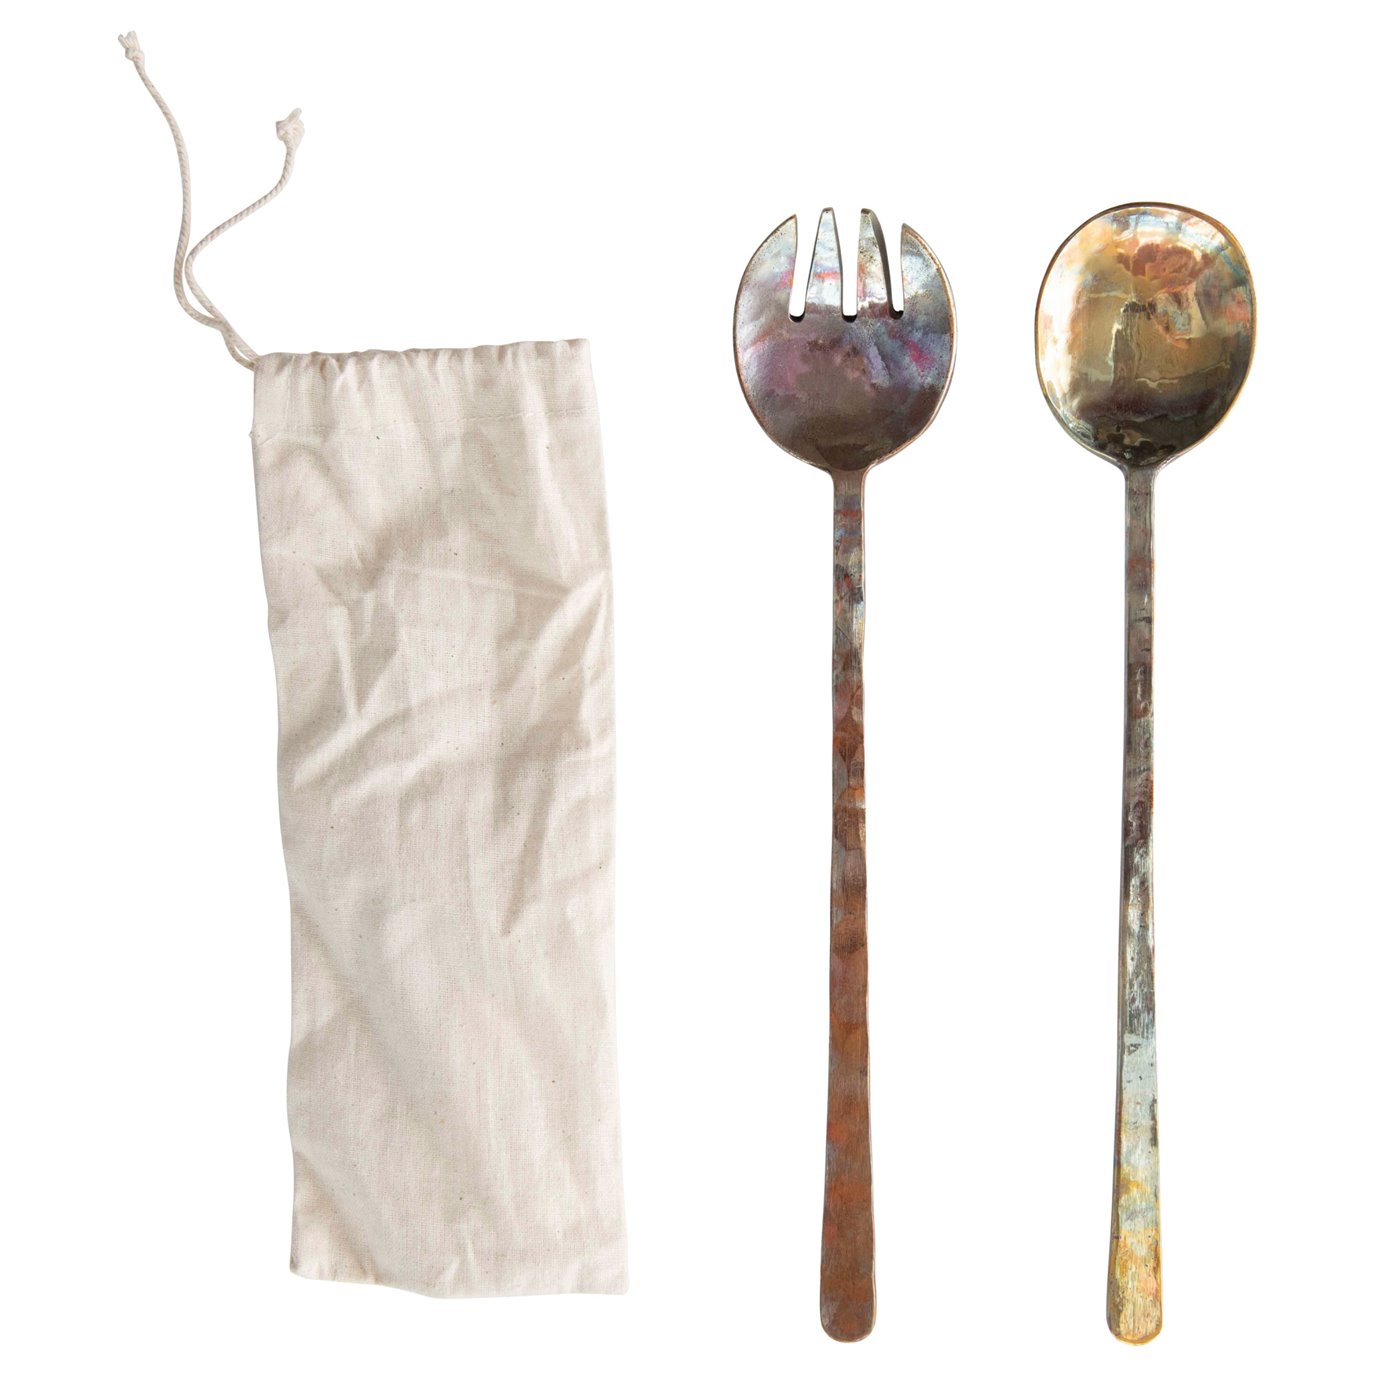 Copper Salad Servers with Burnt Finish & Textured Flat Handles (Set of 2 Pieces in Drawstring Bag)